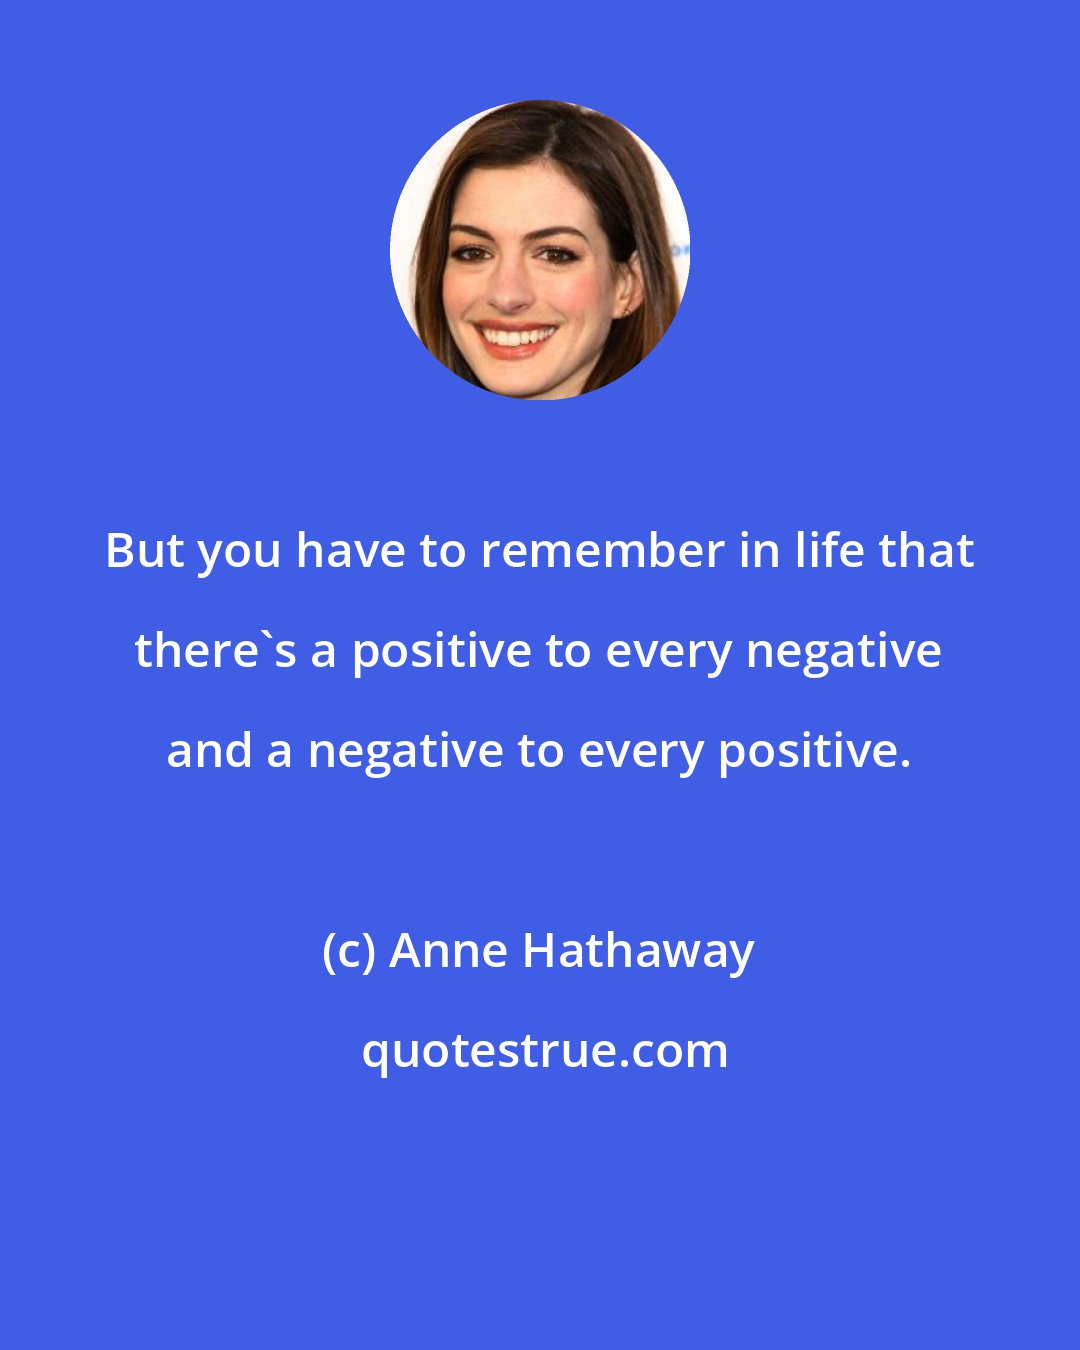 Anne Hathaway: But you have to remember in life that there's a positive to every negative and a negative to every positive.